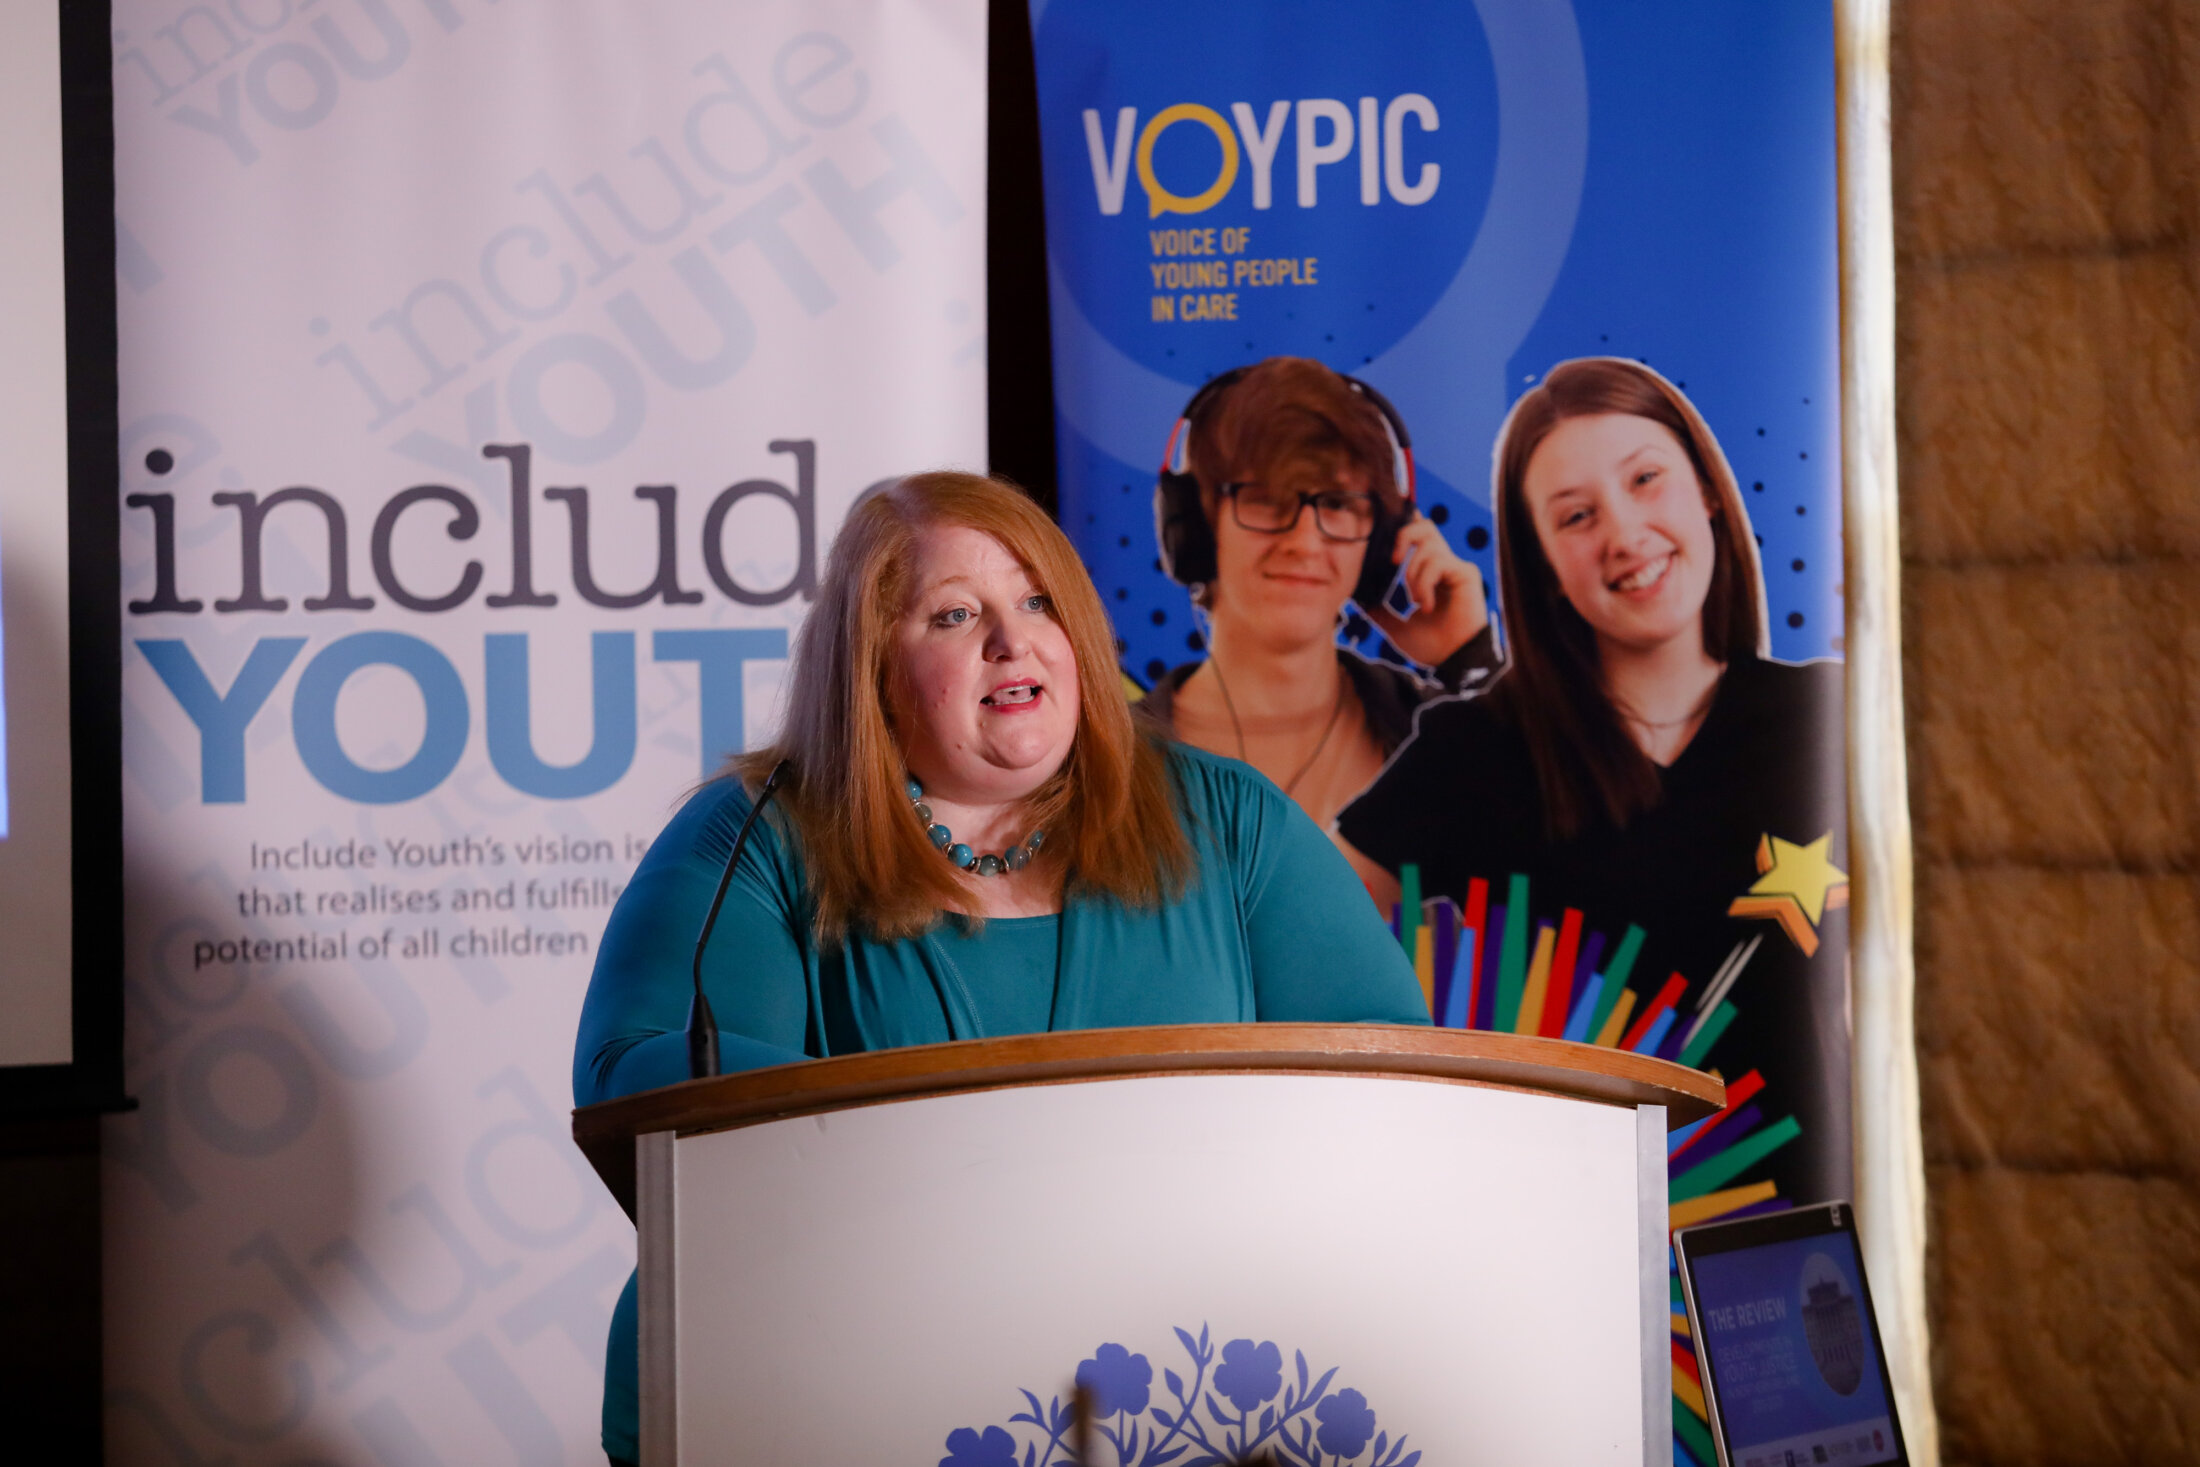 Justice Minister Naomi Long MLA recognises the importance of the report